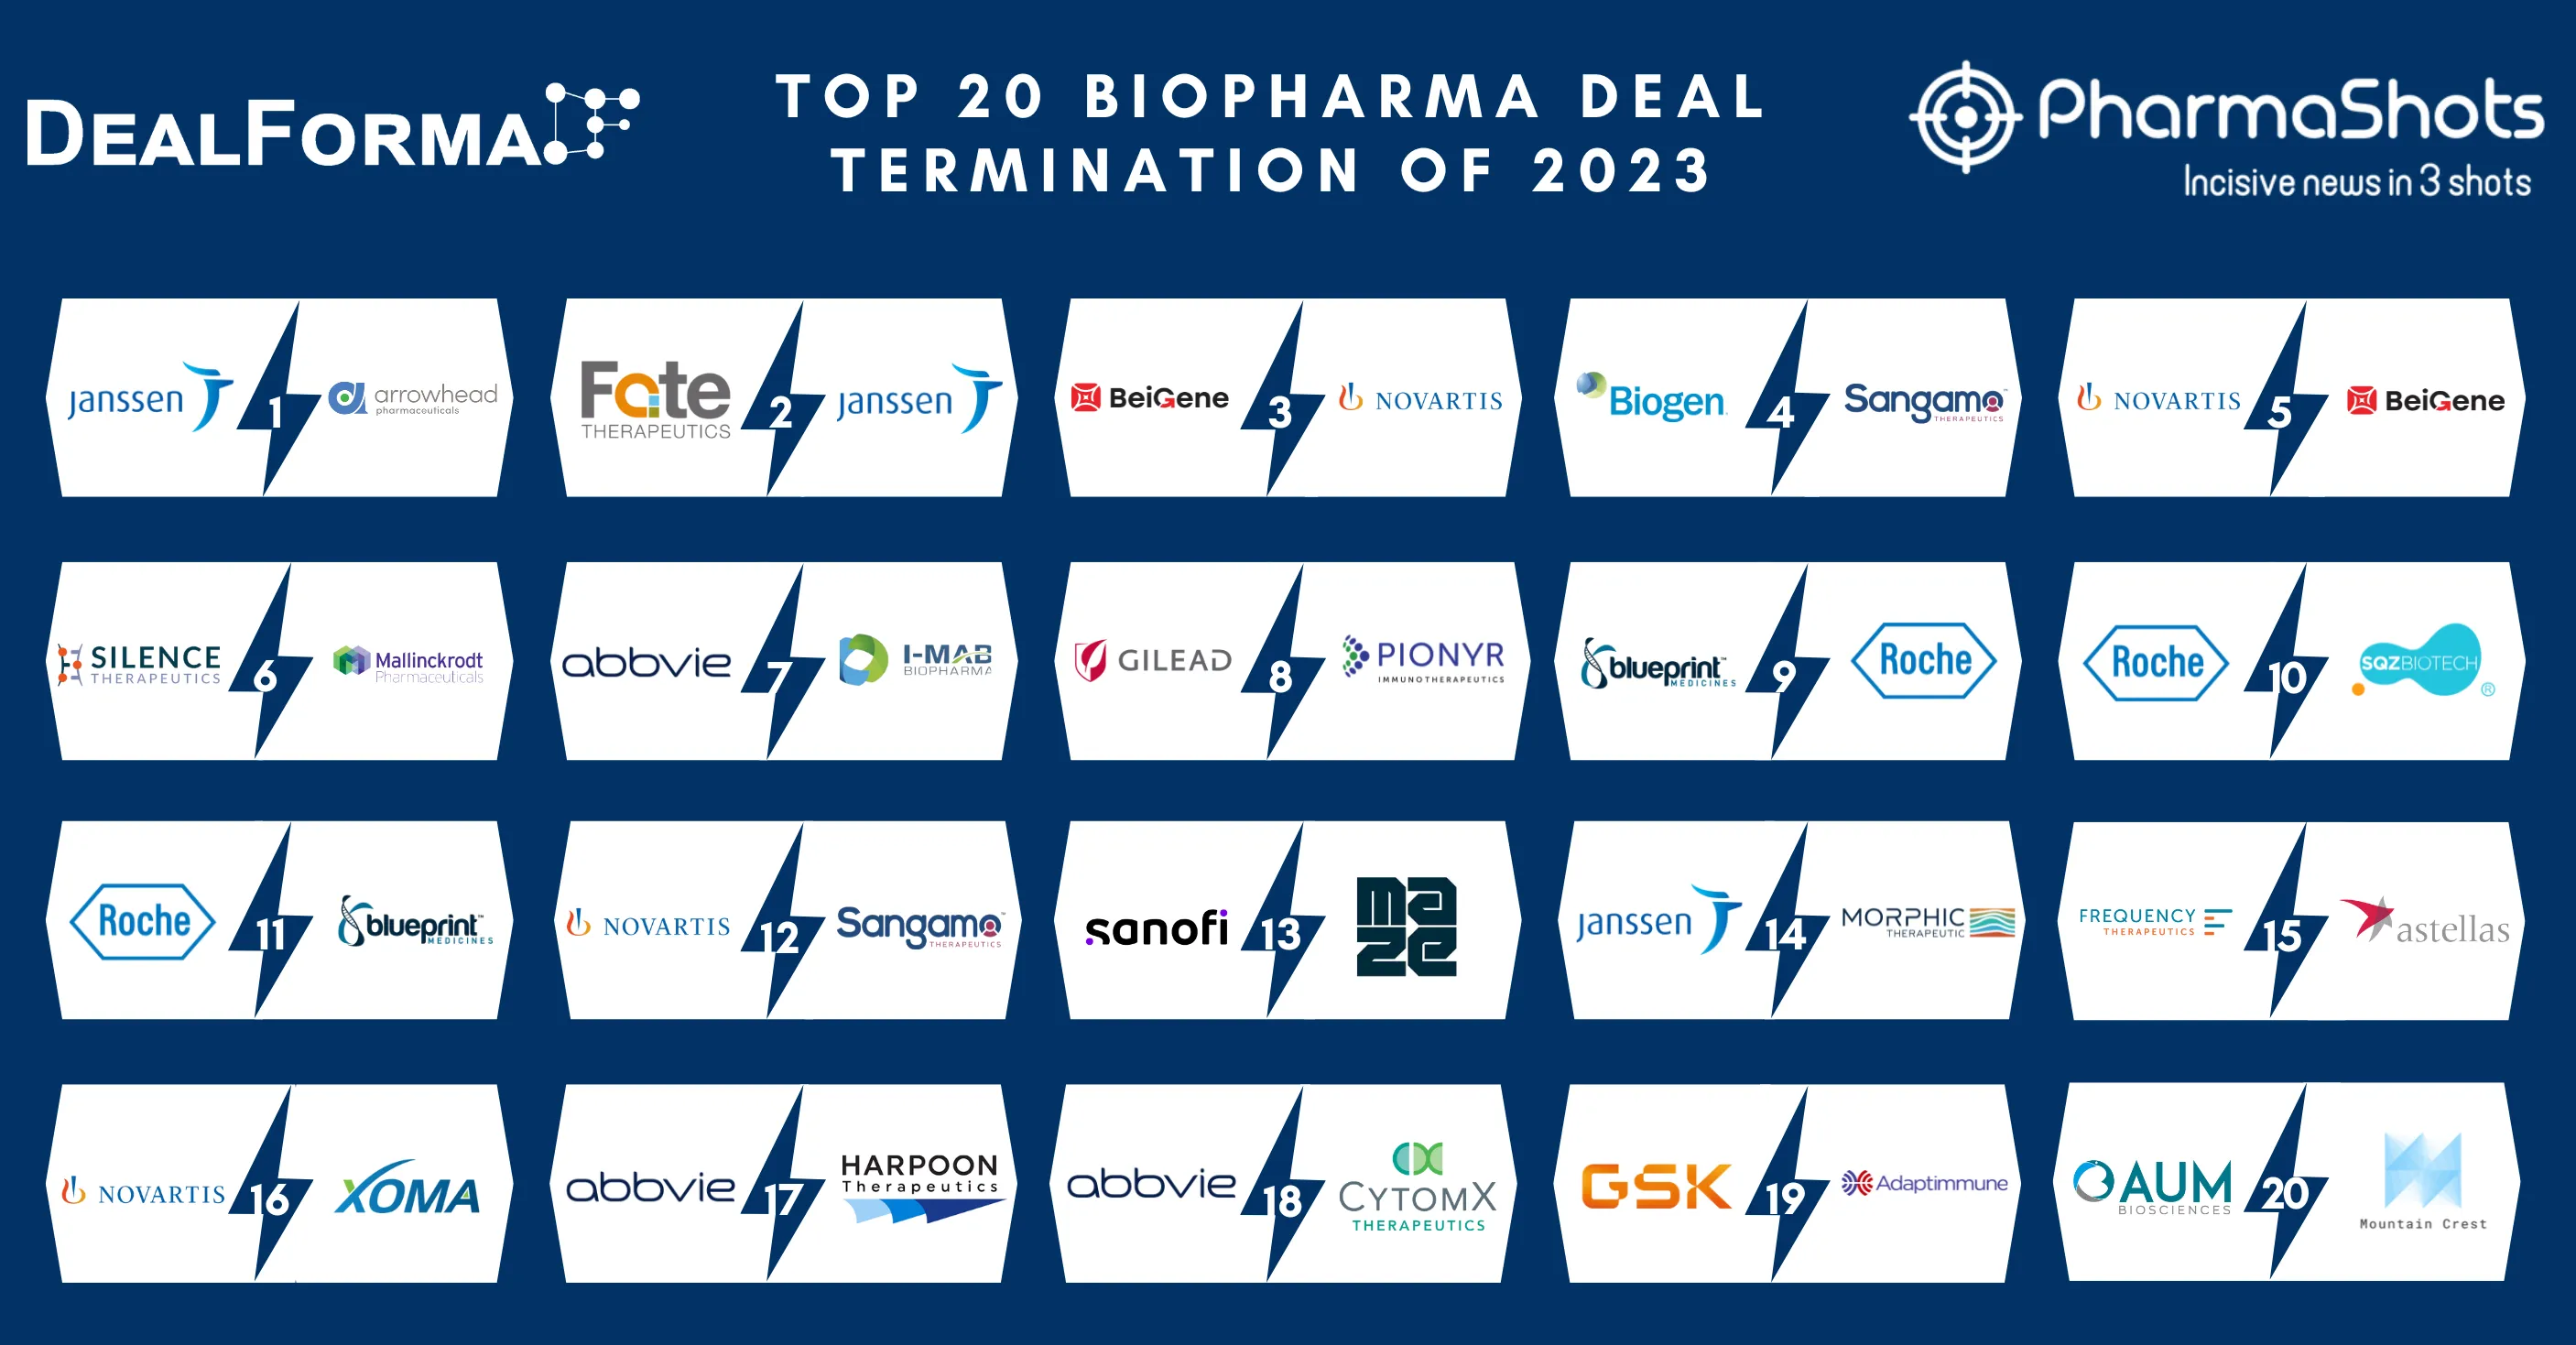 Top 20 Biopharma Deal Terminations of 2023 Based on Total Deal Value